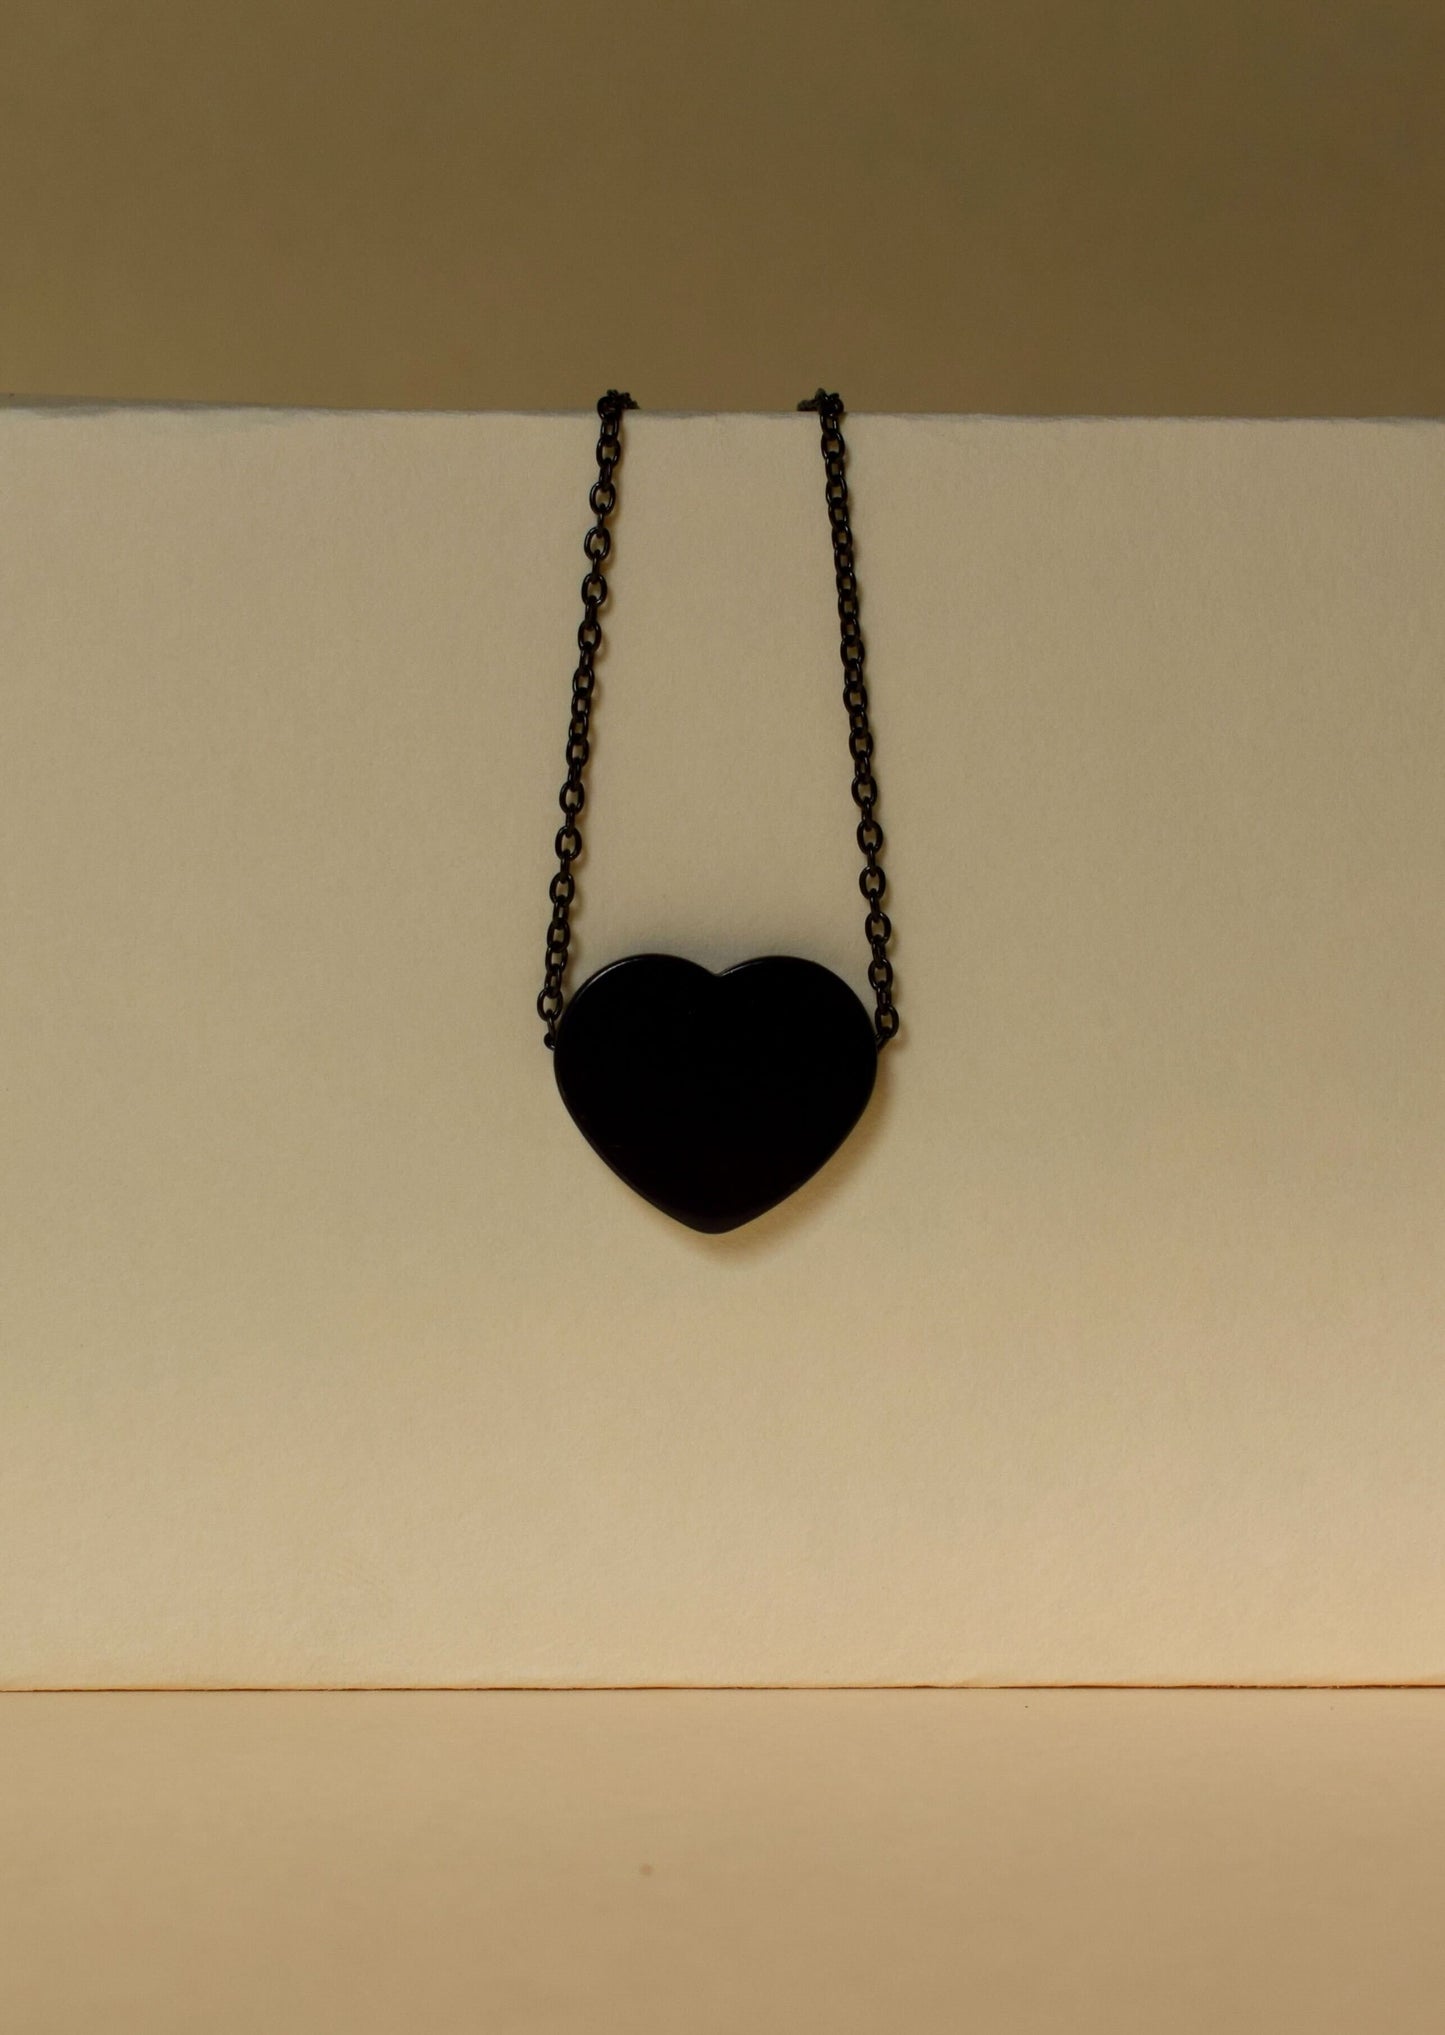 Black Heart Necklace | Premium Quality | Necklace gift for her